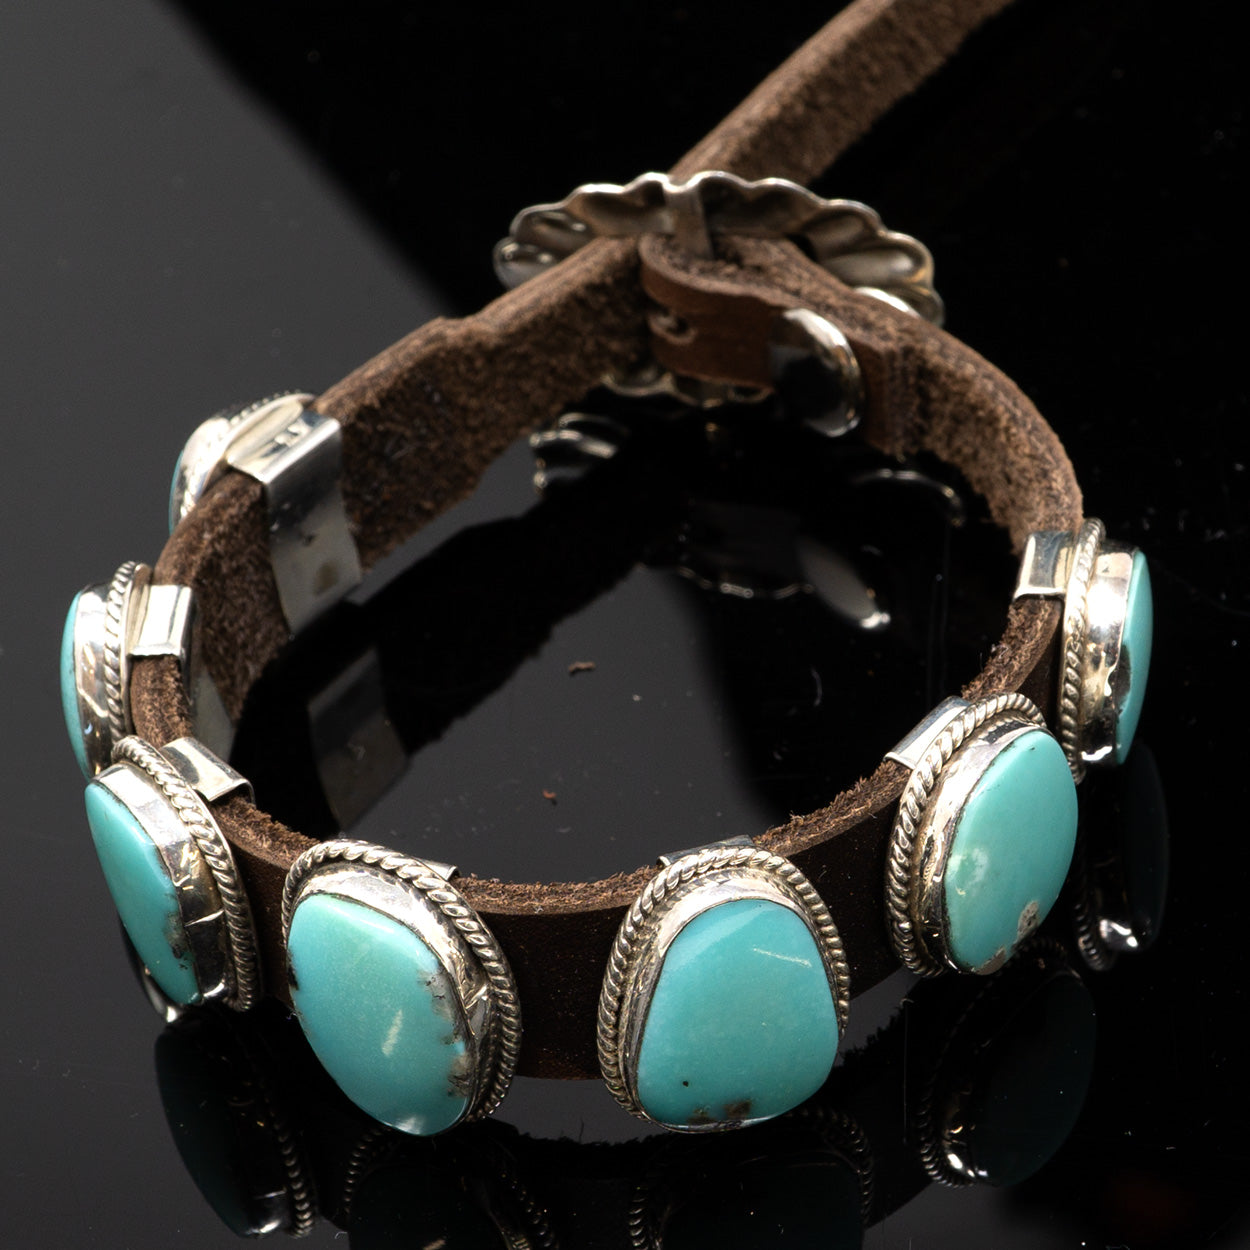 Green Kingman Turquoise Cabochons on Leather Bracelet | by Bill Willie